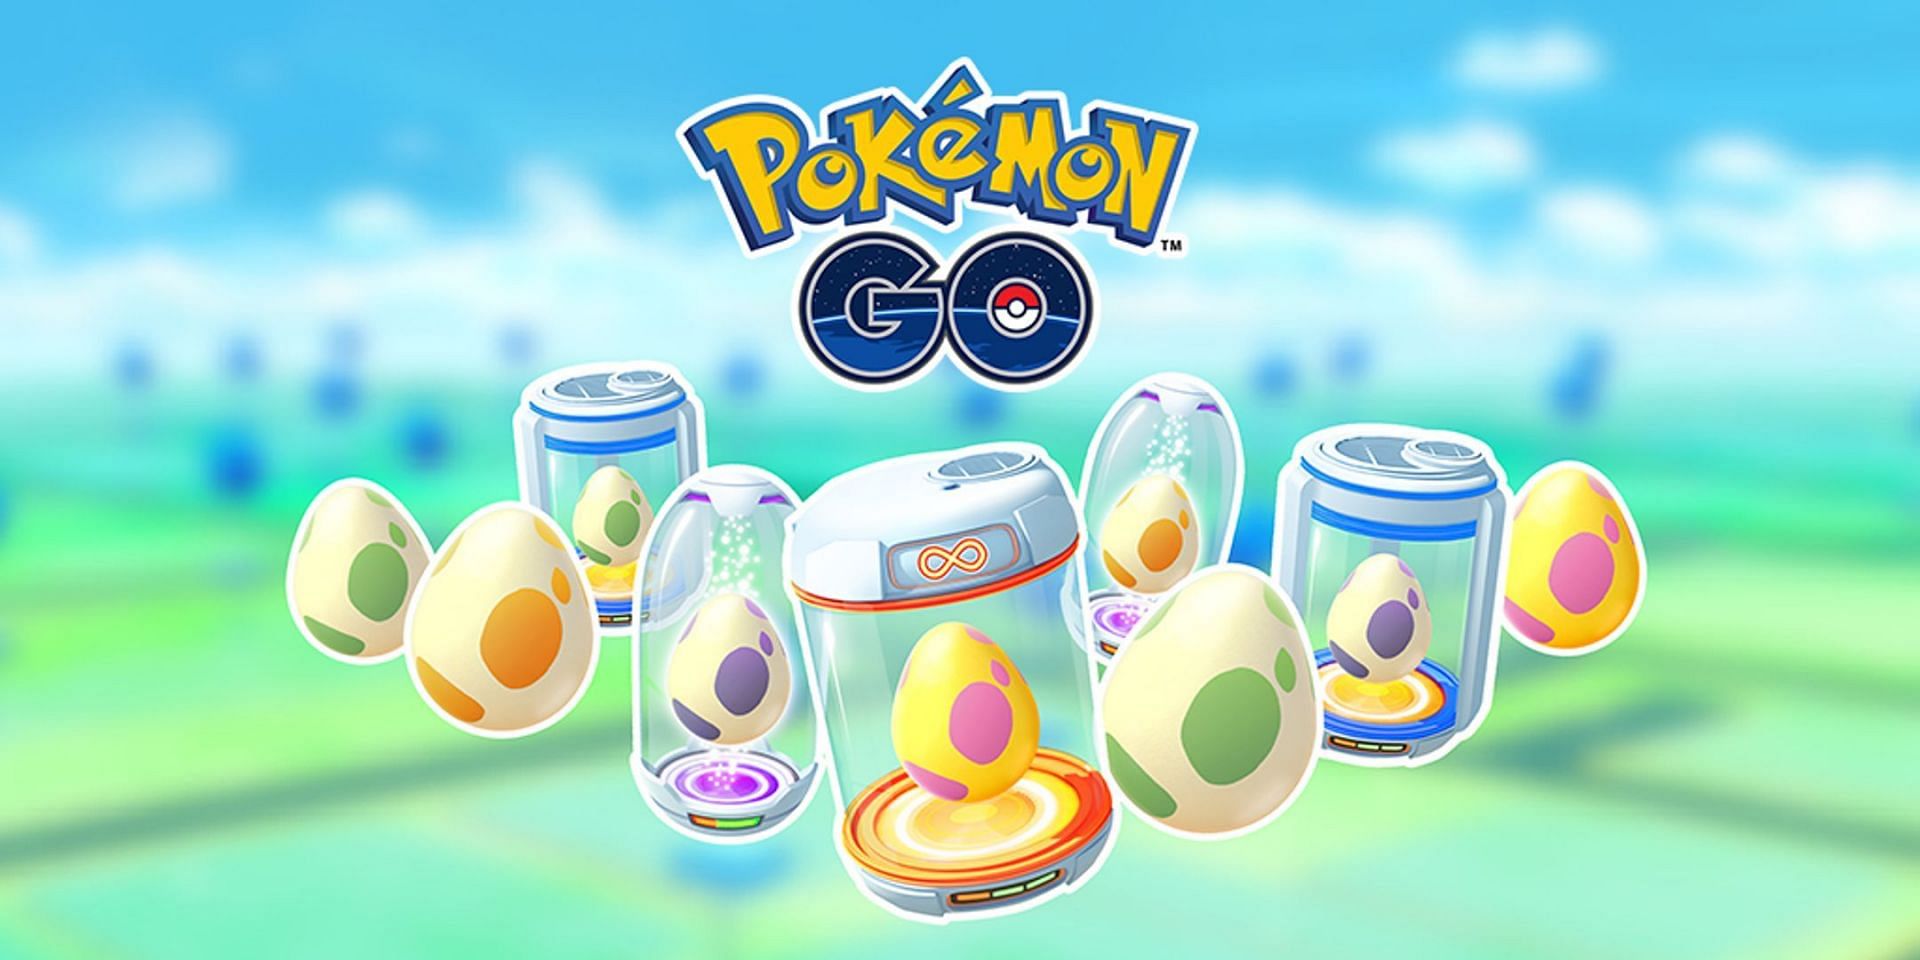 Most of the variants of eggs available in Pokemon GO (Image via The Pokemon Company)